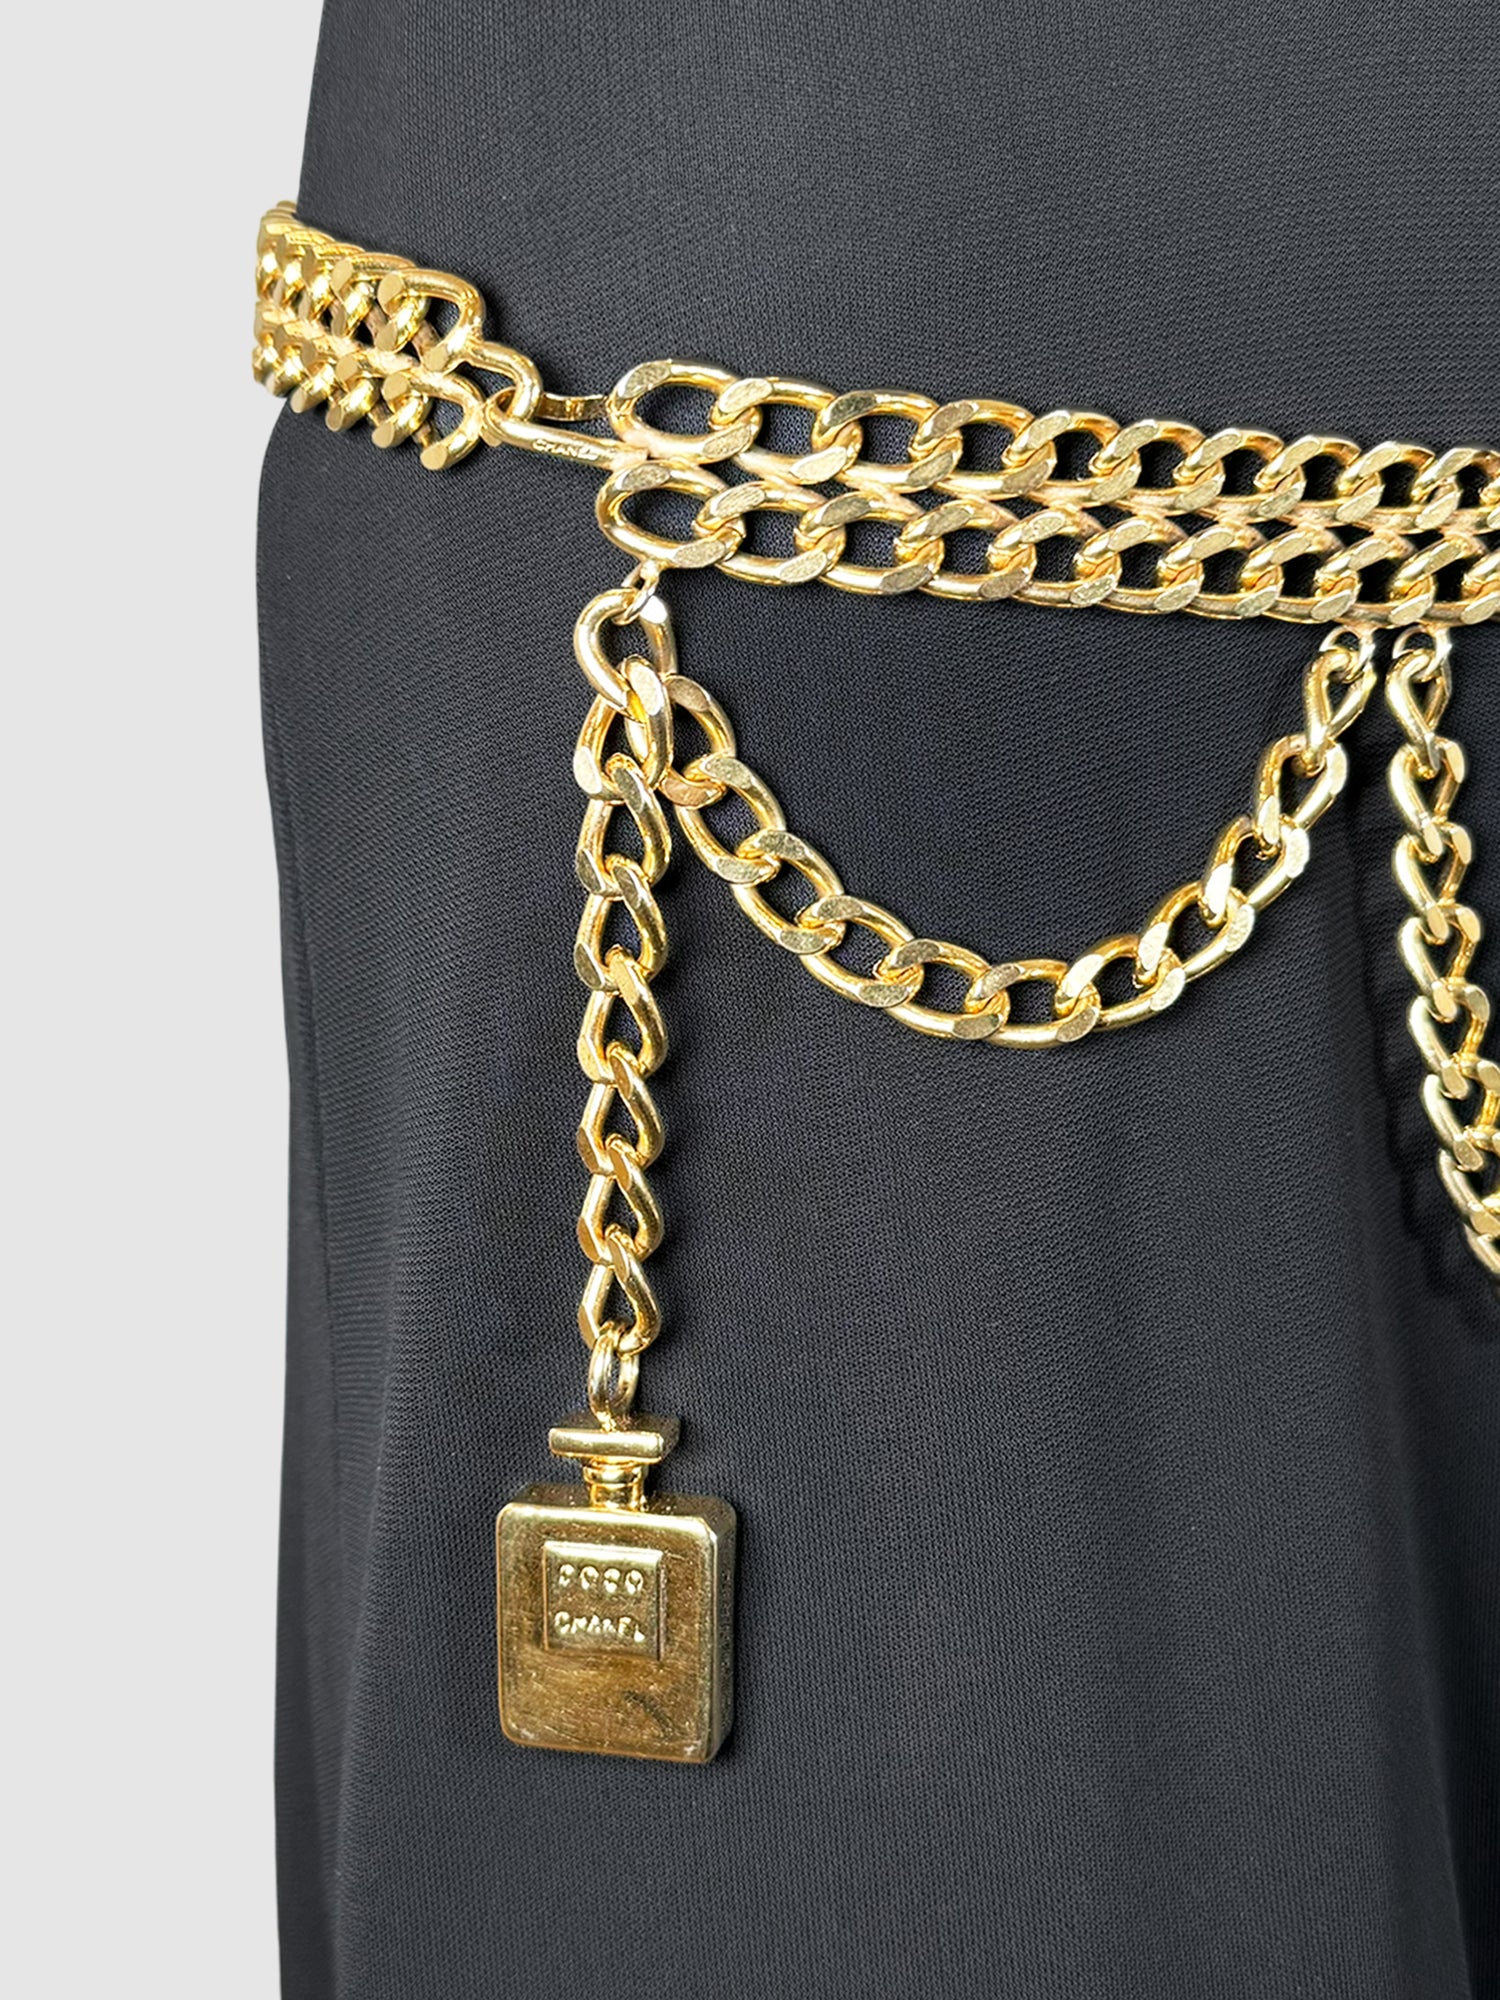 Chanel Vintage Perfume Bottle Charm Chain Belt Secondhand Luxury Consignment Trendy